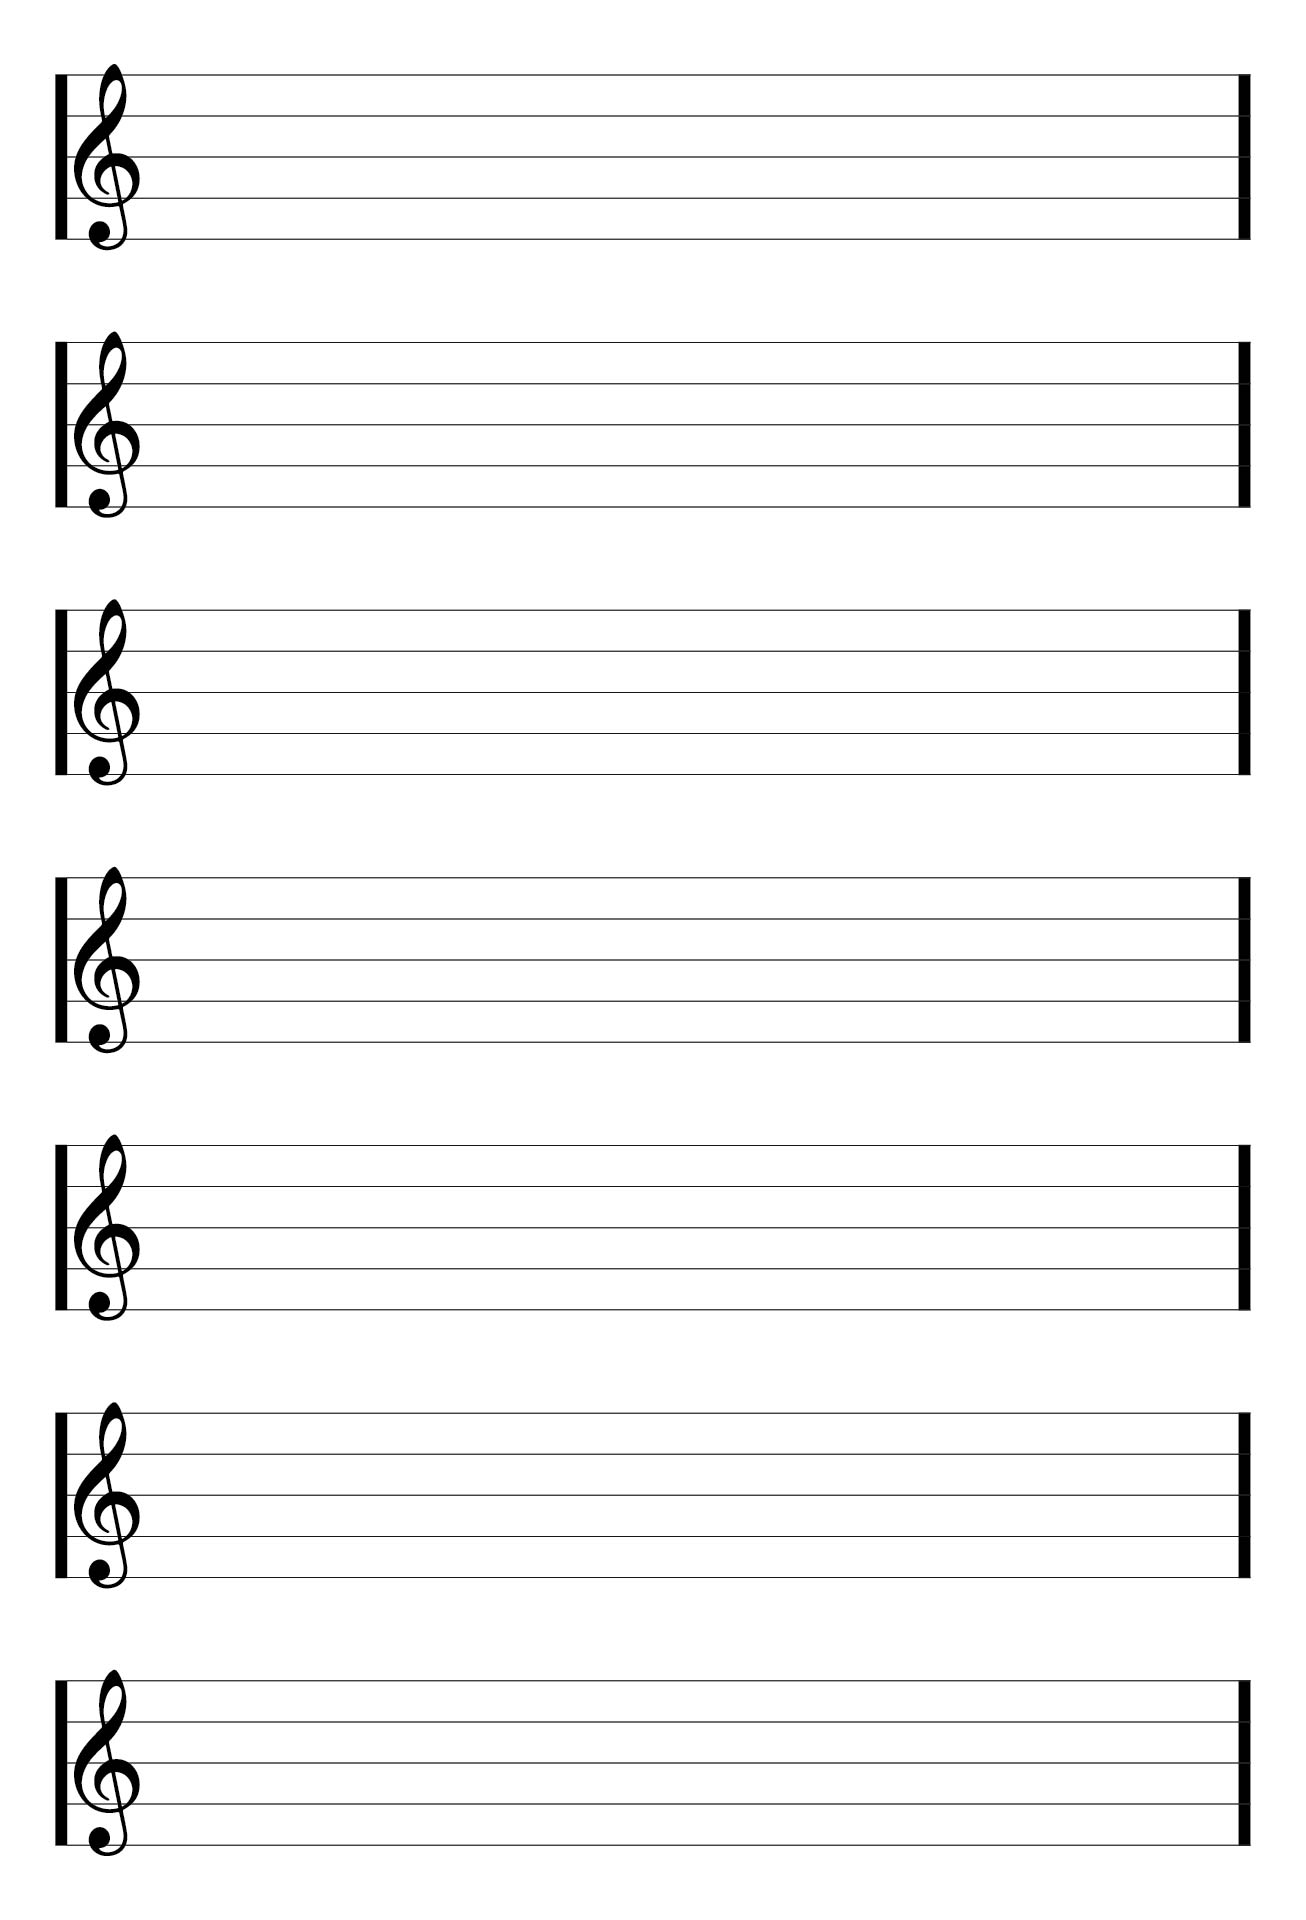 printable blank sheet music with bar lines